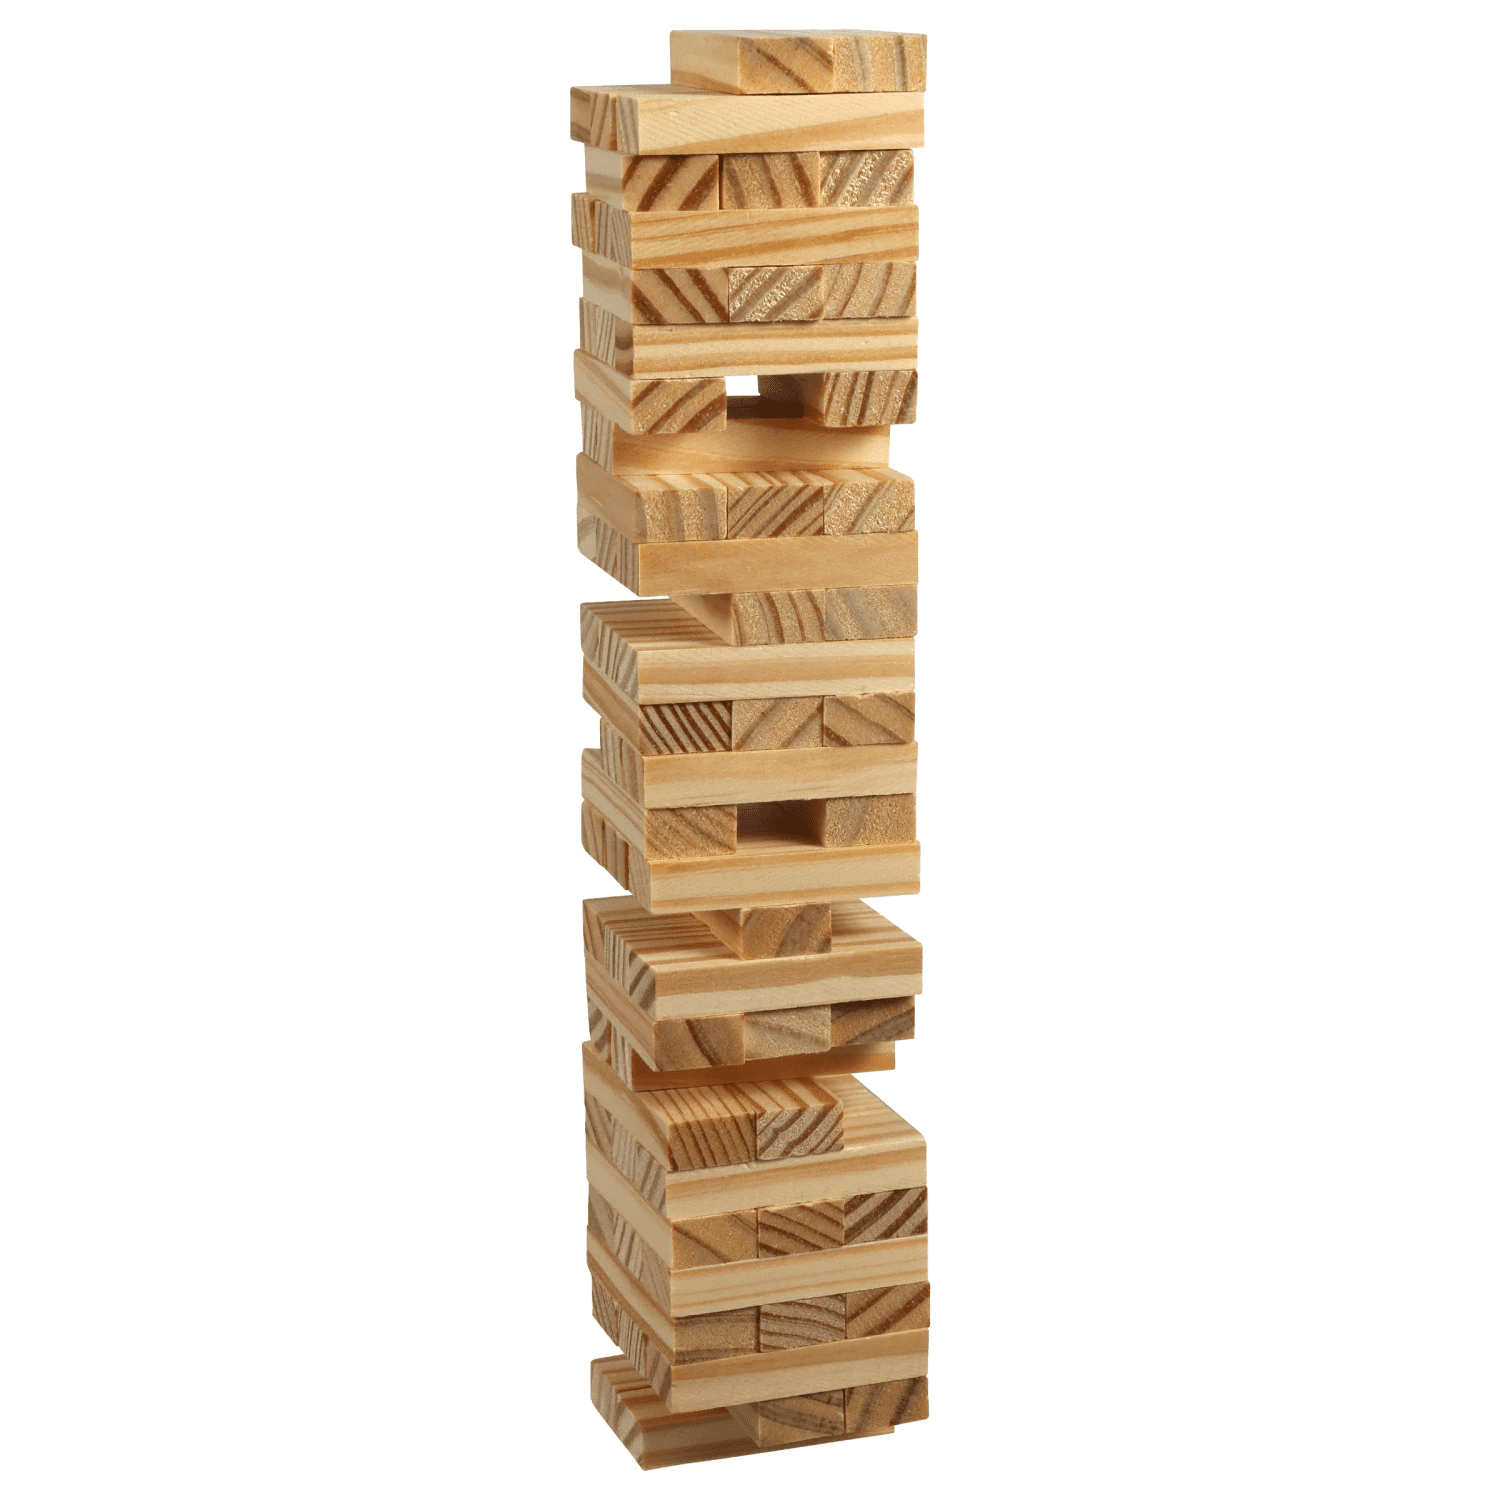 Ty My Traditional Games Tumbling Tower Game 5016563993432 for sale online 